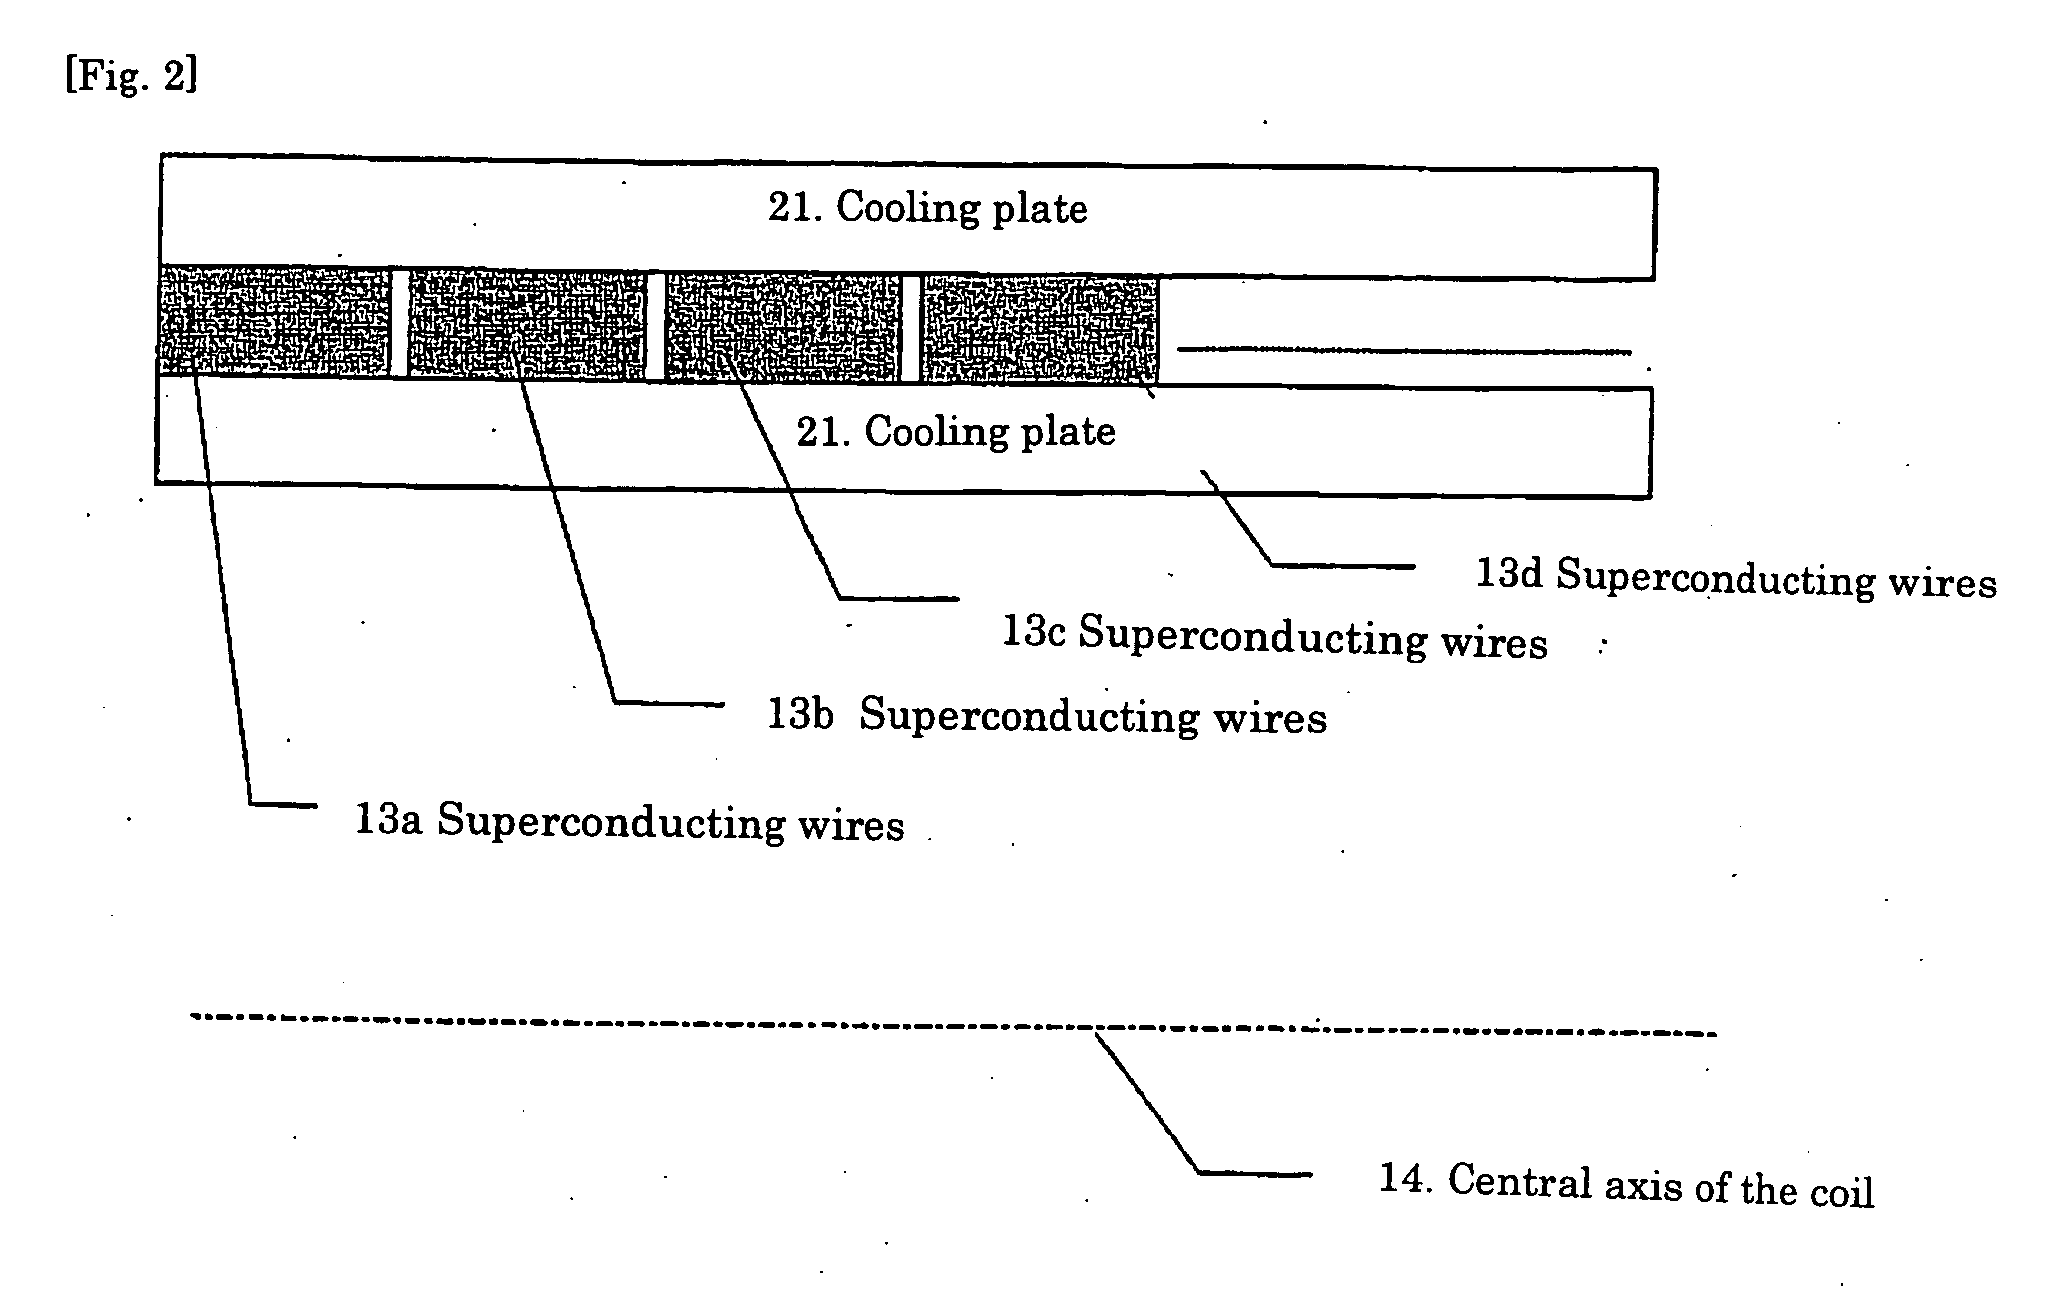 Superconducting wire and superconducting coil employing it